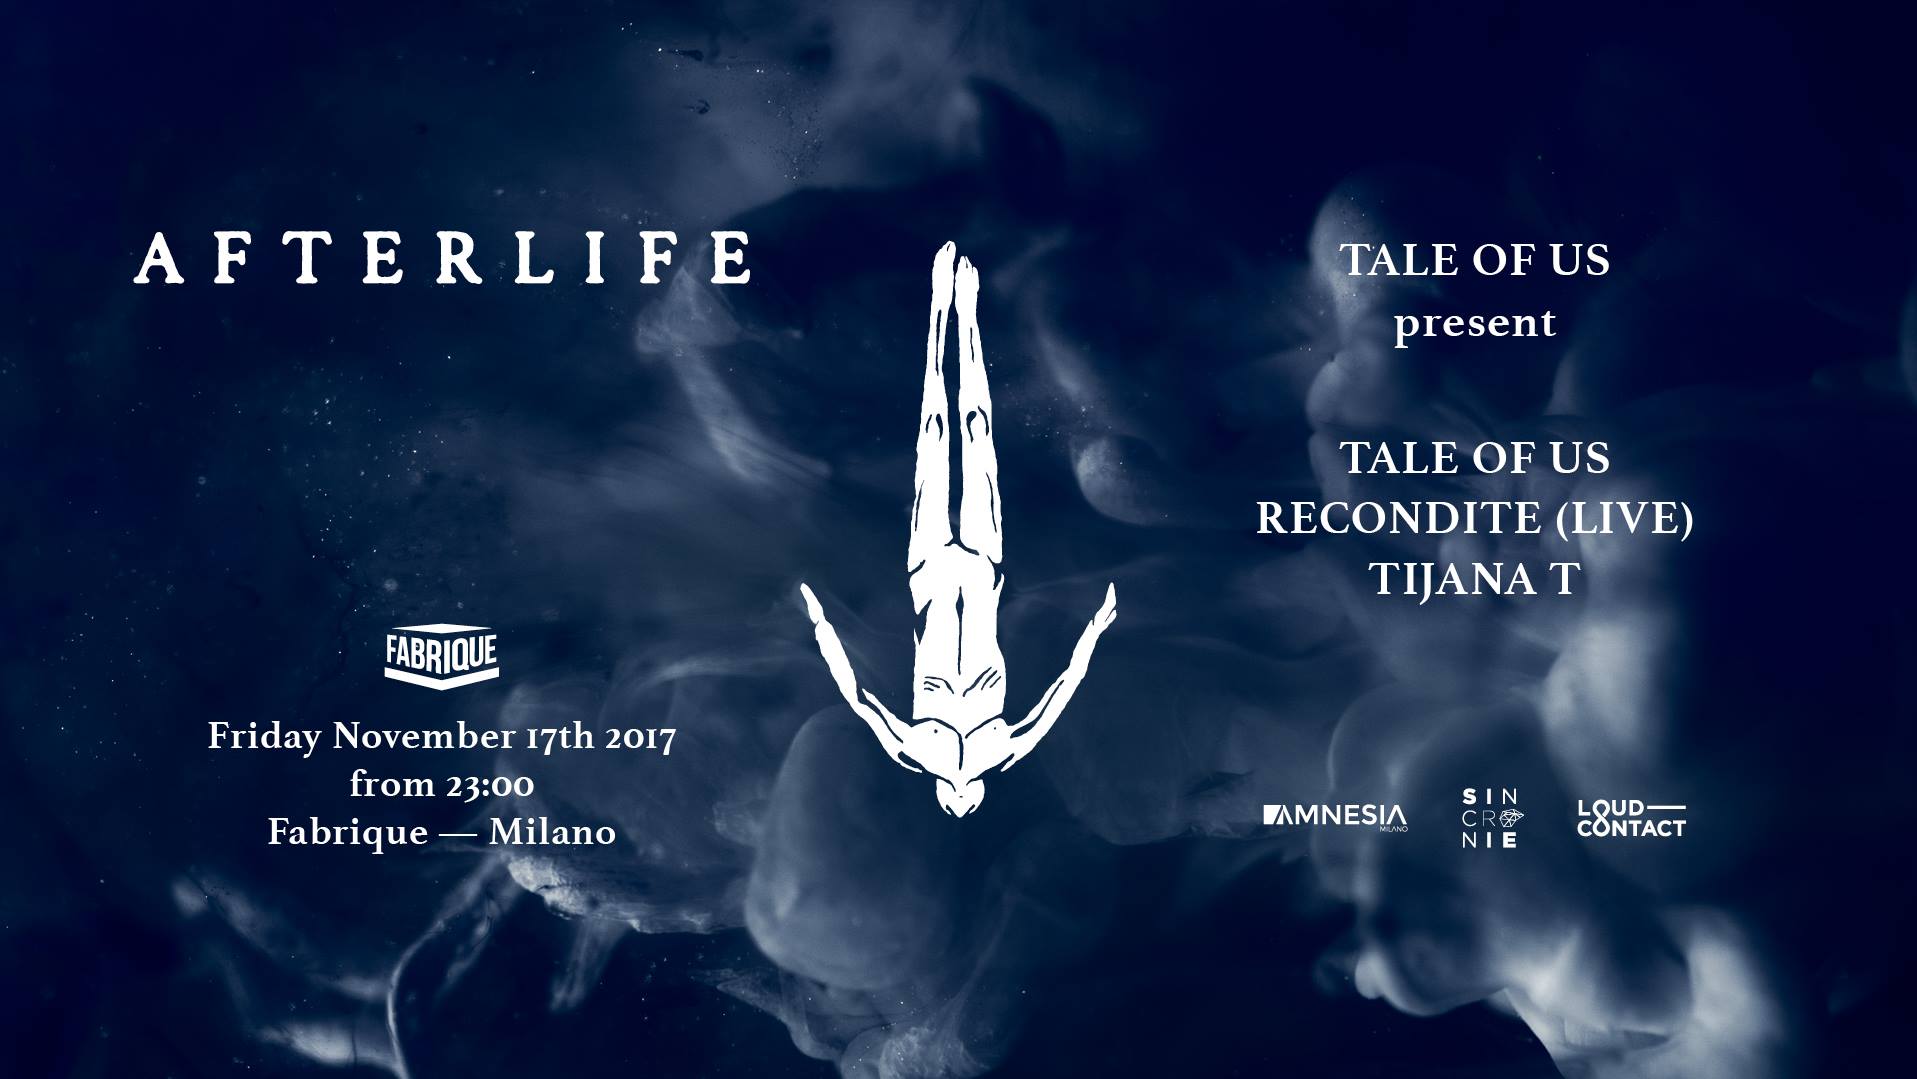 Afterlife Fabrique Milano 17 11 2017